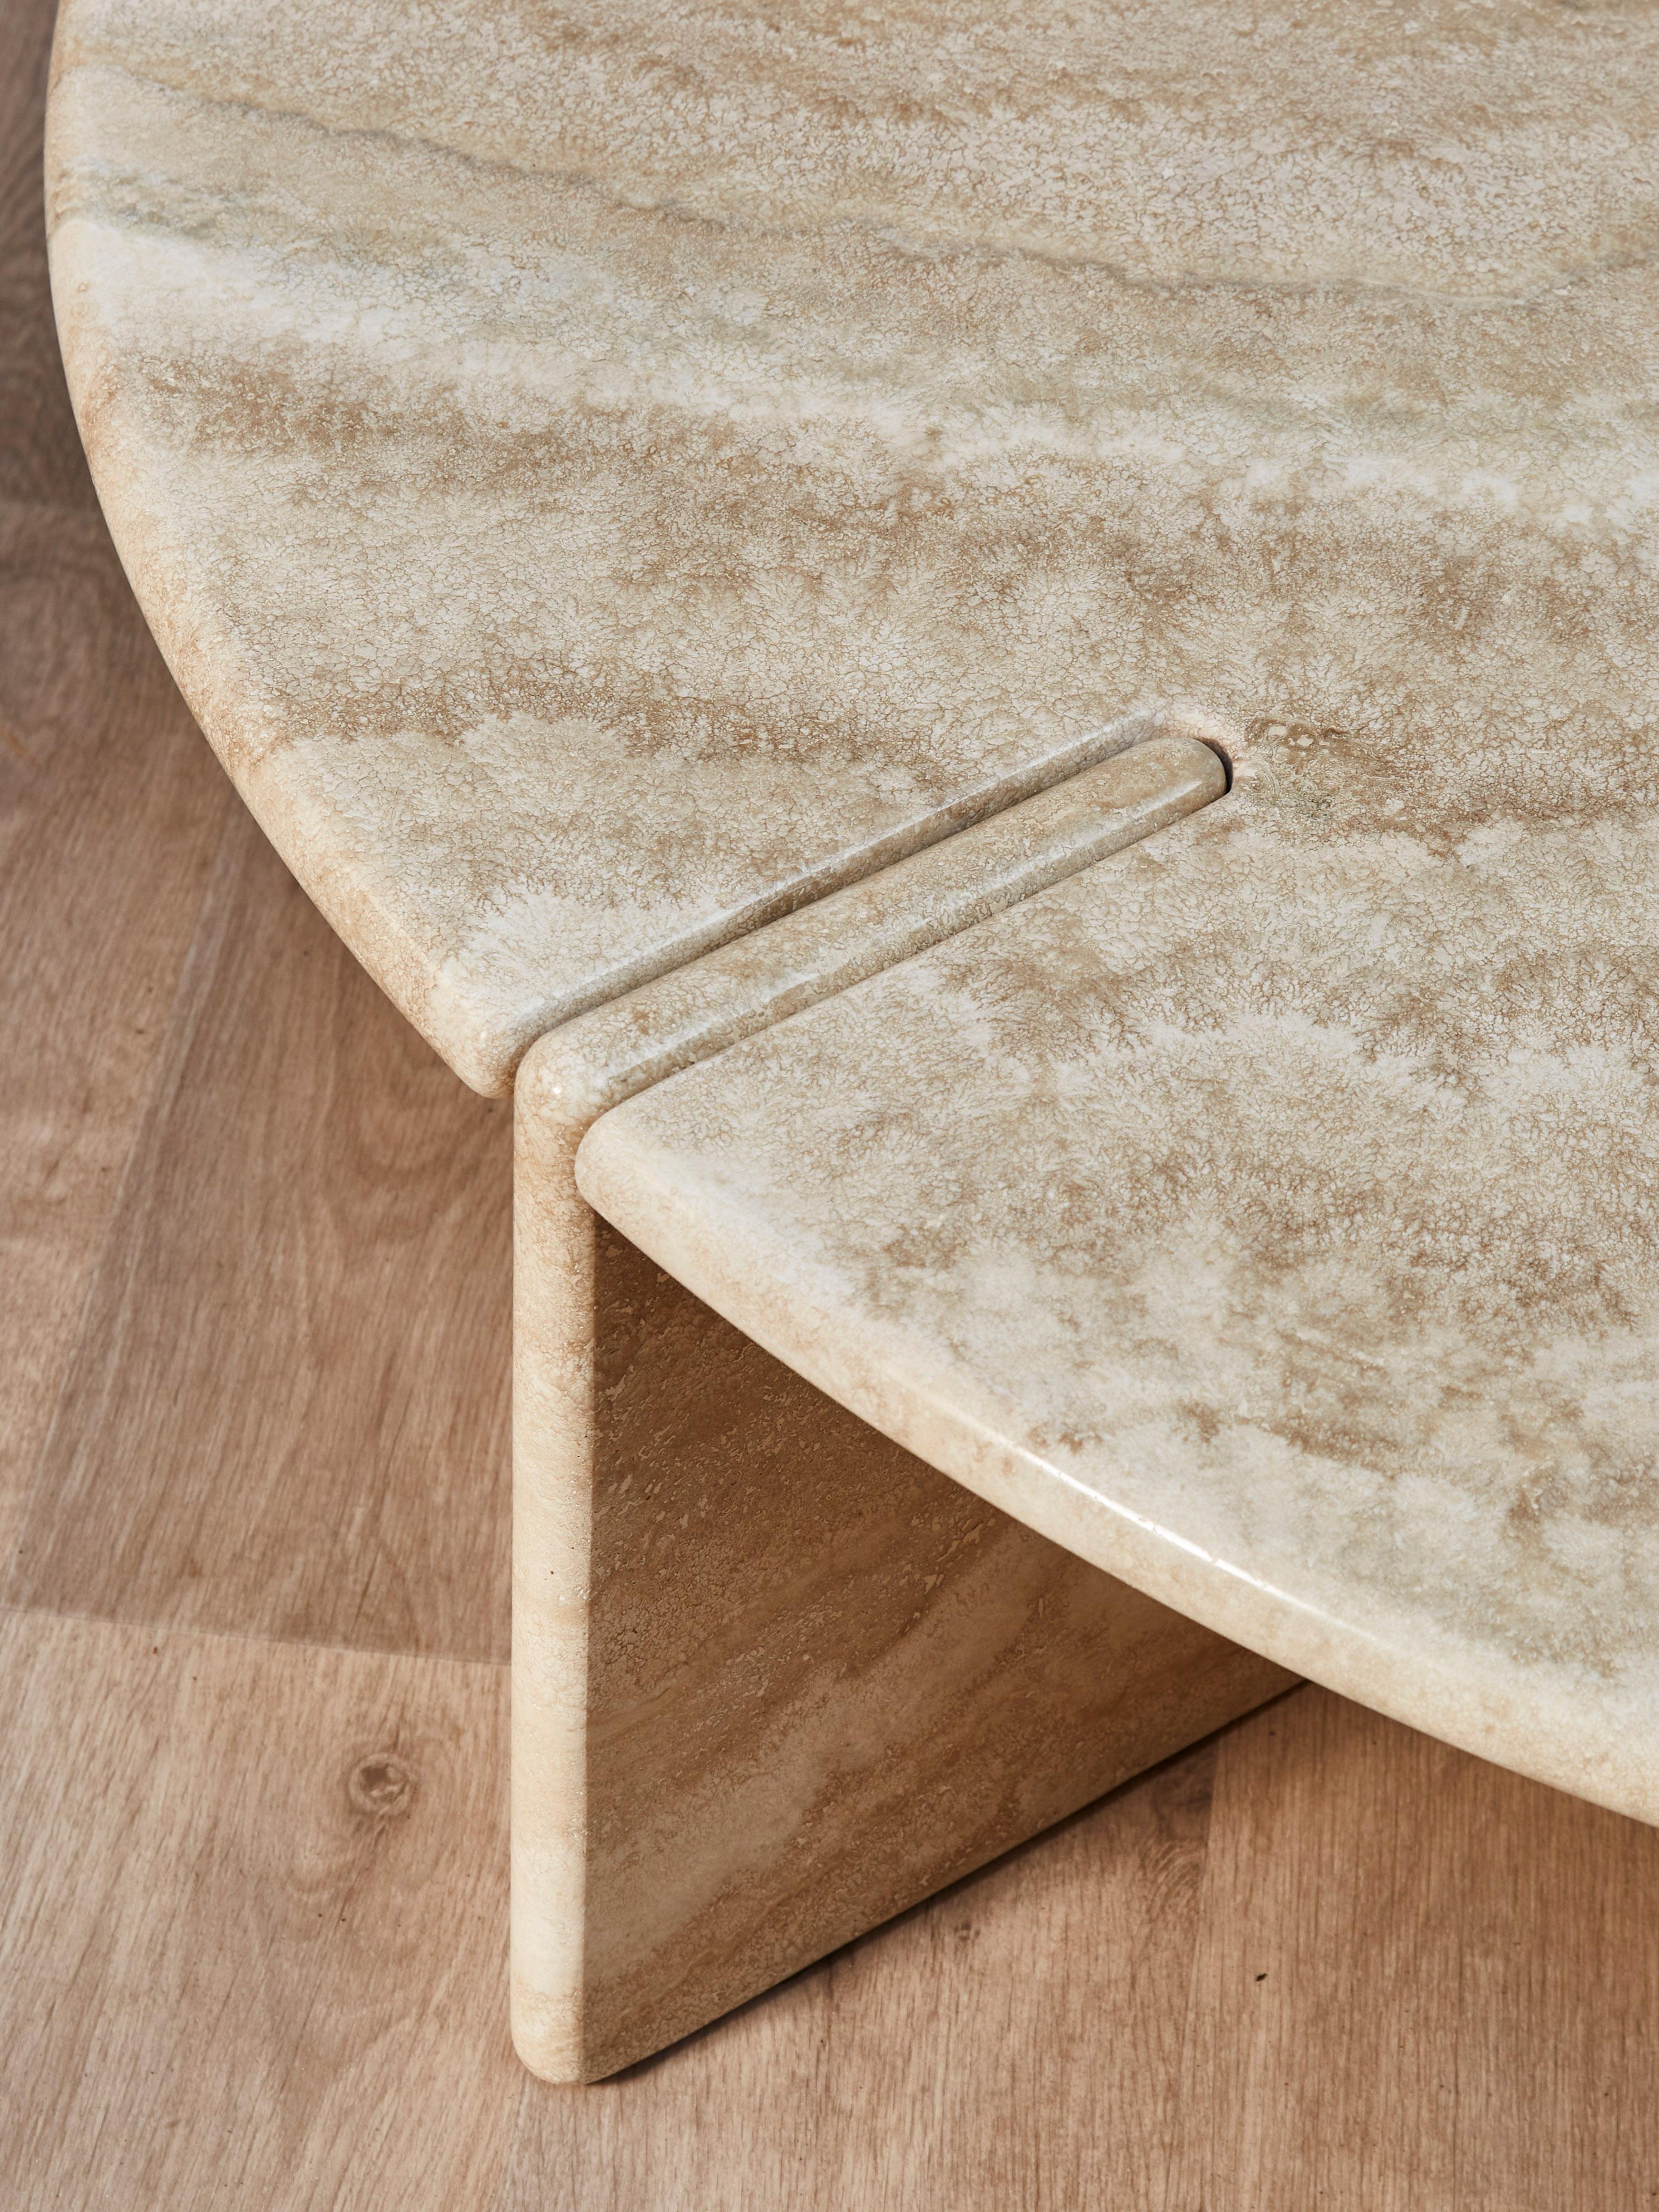 Elegant cocktail table entirely made of massive travertine stone.
Piece realized by Studio Glustin,
France, 2021.